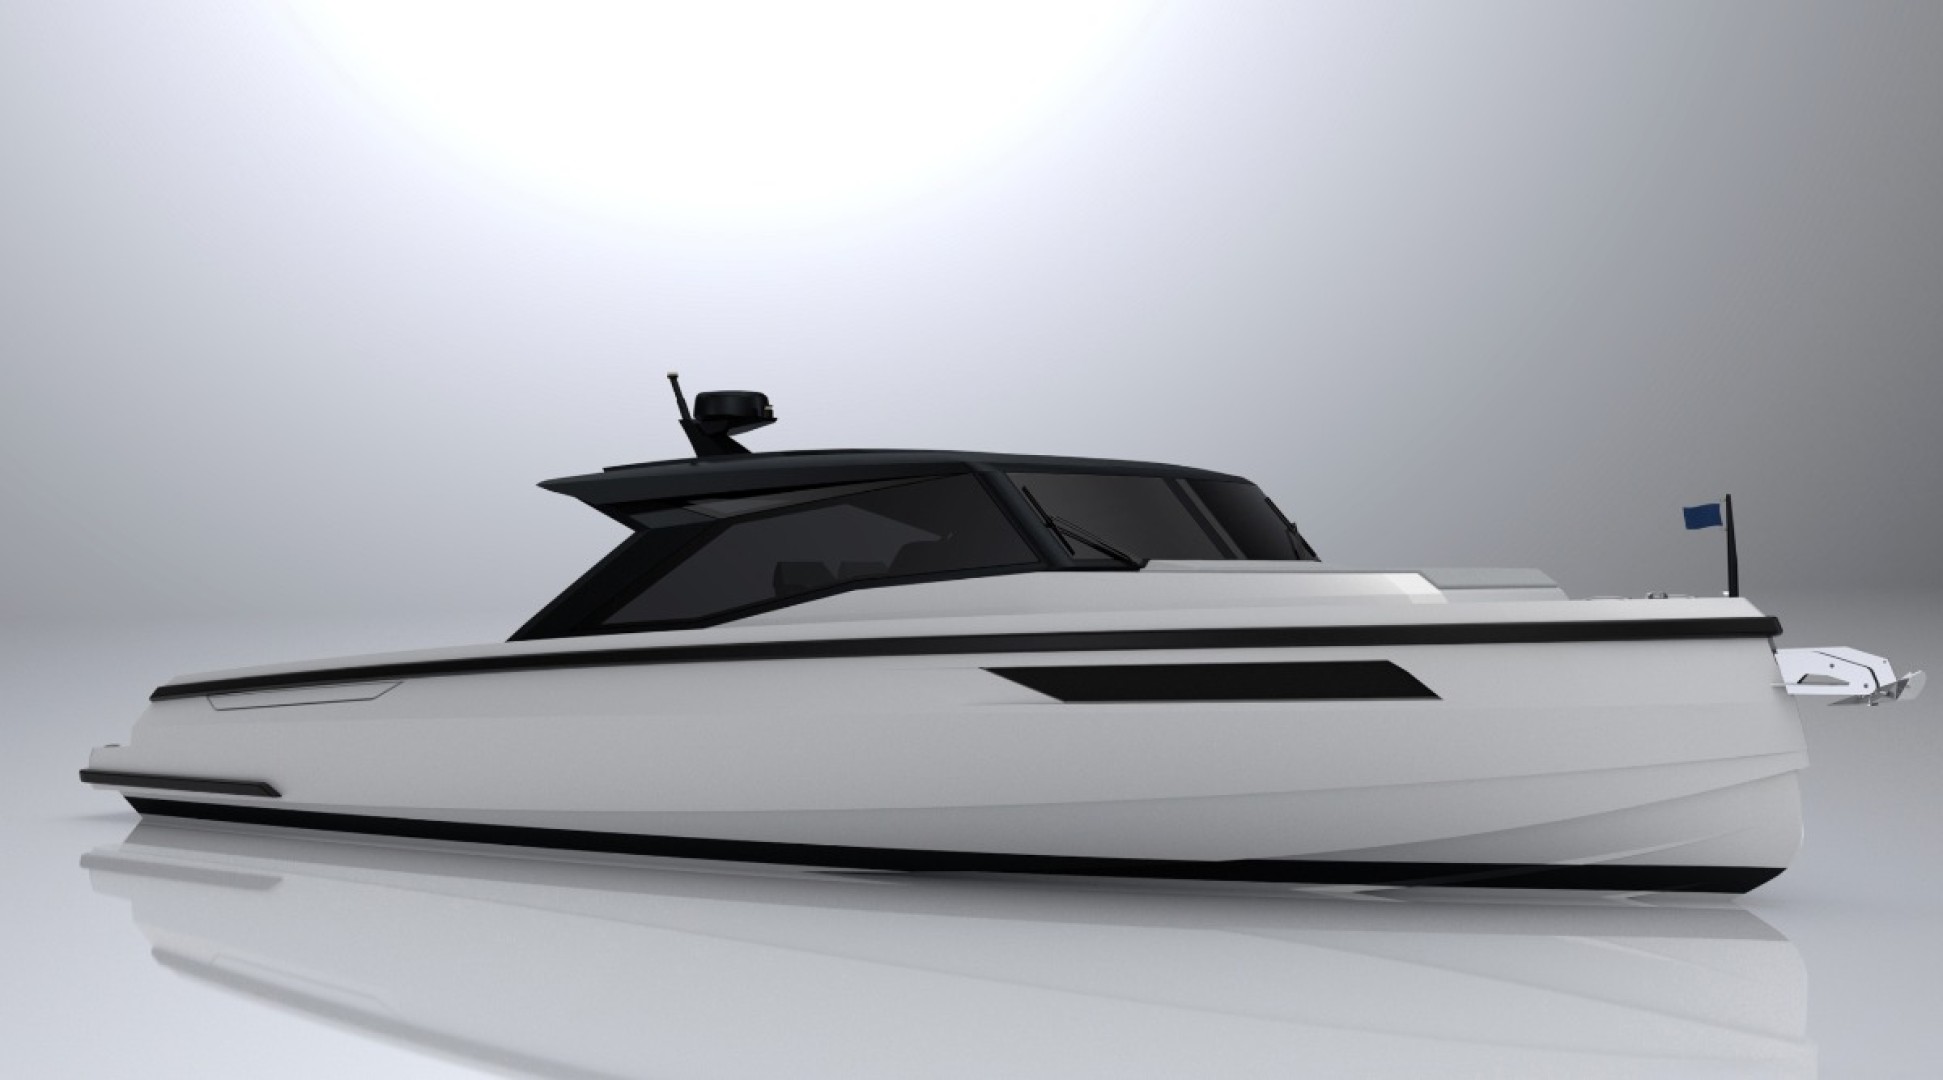 New Italian yacht brand Santasevera entering the market with a 52-footer